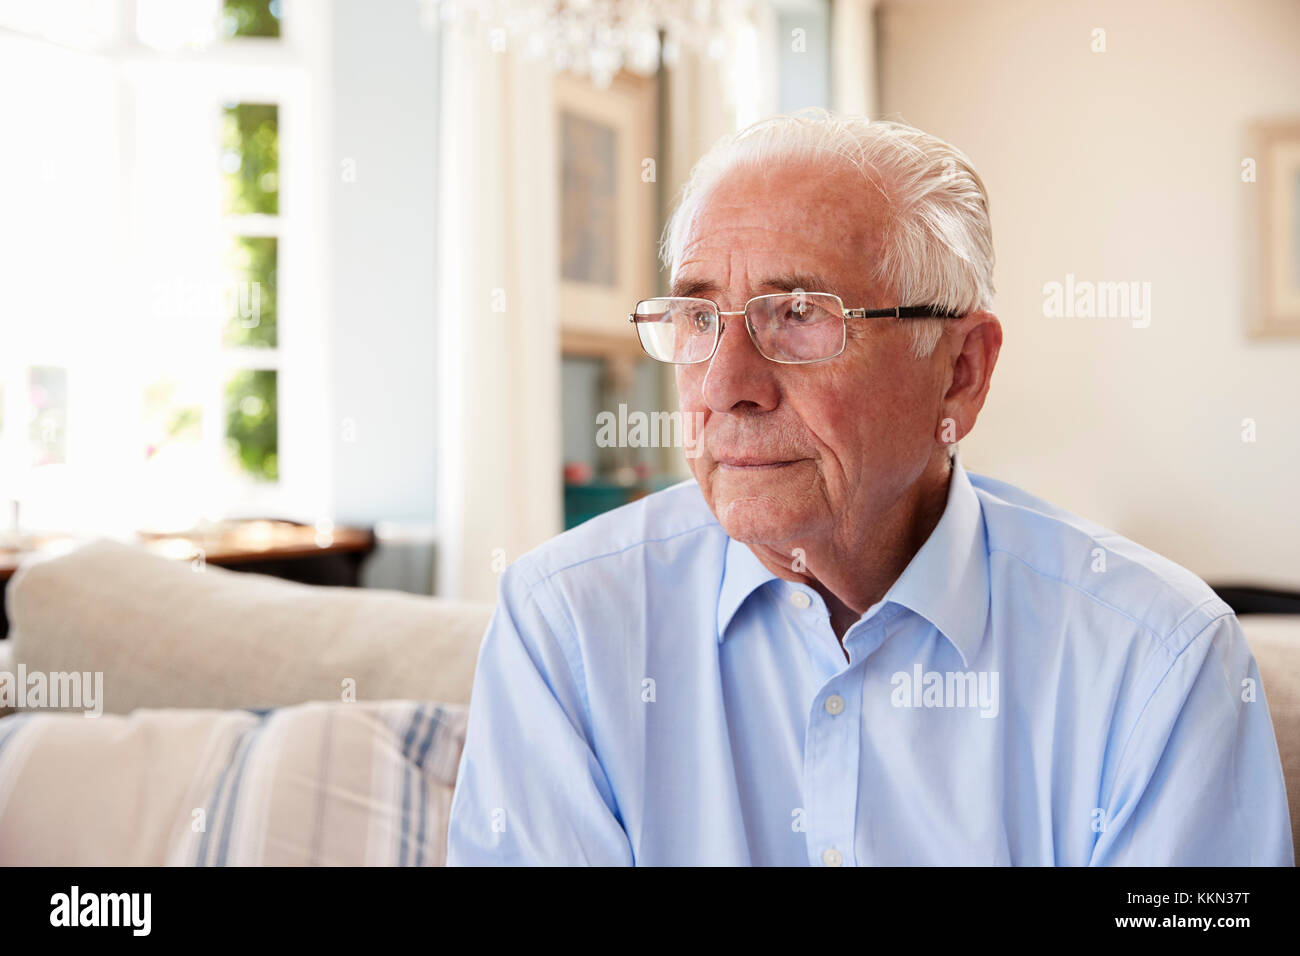 Senior Man Sitting On Sofa At Home Suffering From Depression Stock Photo